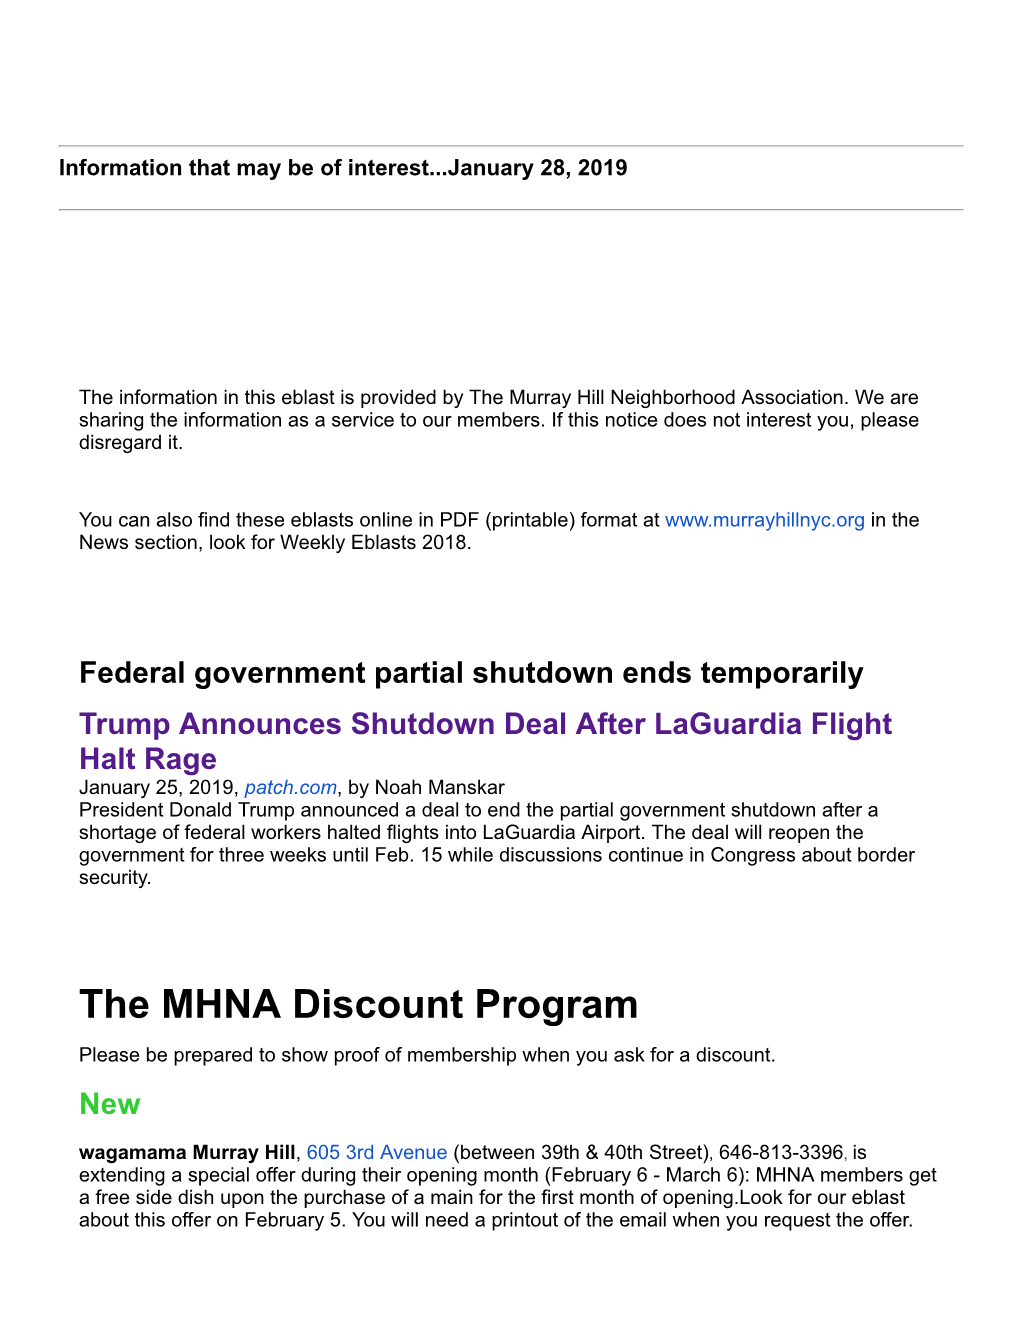 The MHNA Discount Program Please Be Prepared to Show Proof of Membership When You Ask for a Discount